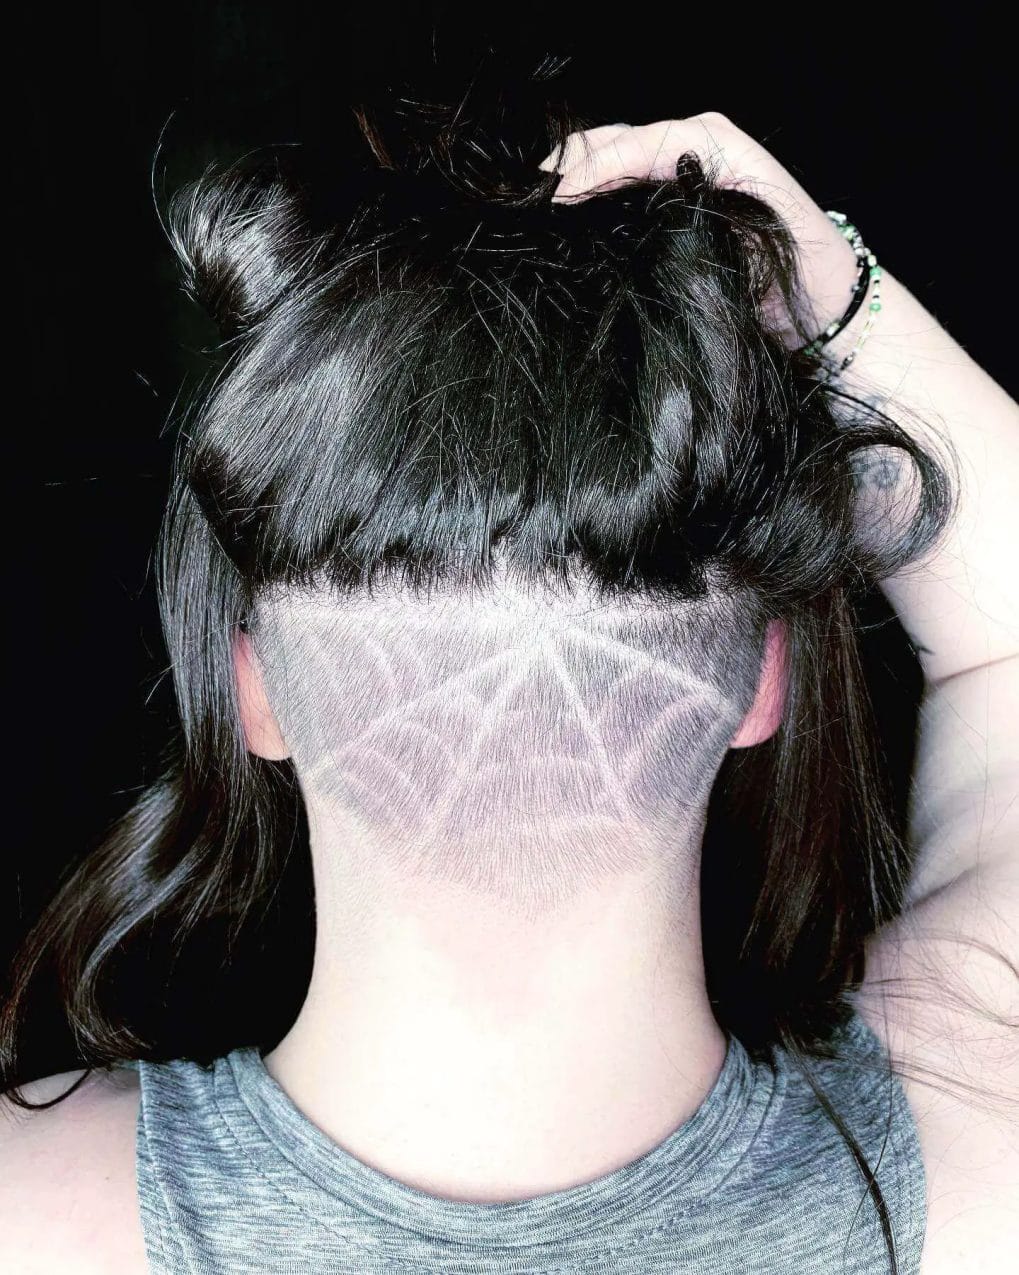 Dark hair pulled back to reveal an undercut with a web pattern.